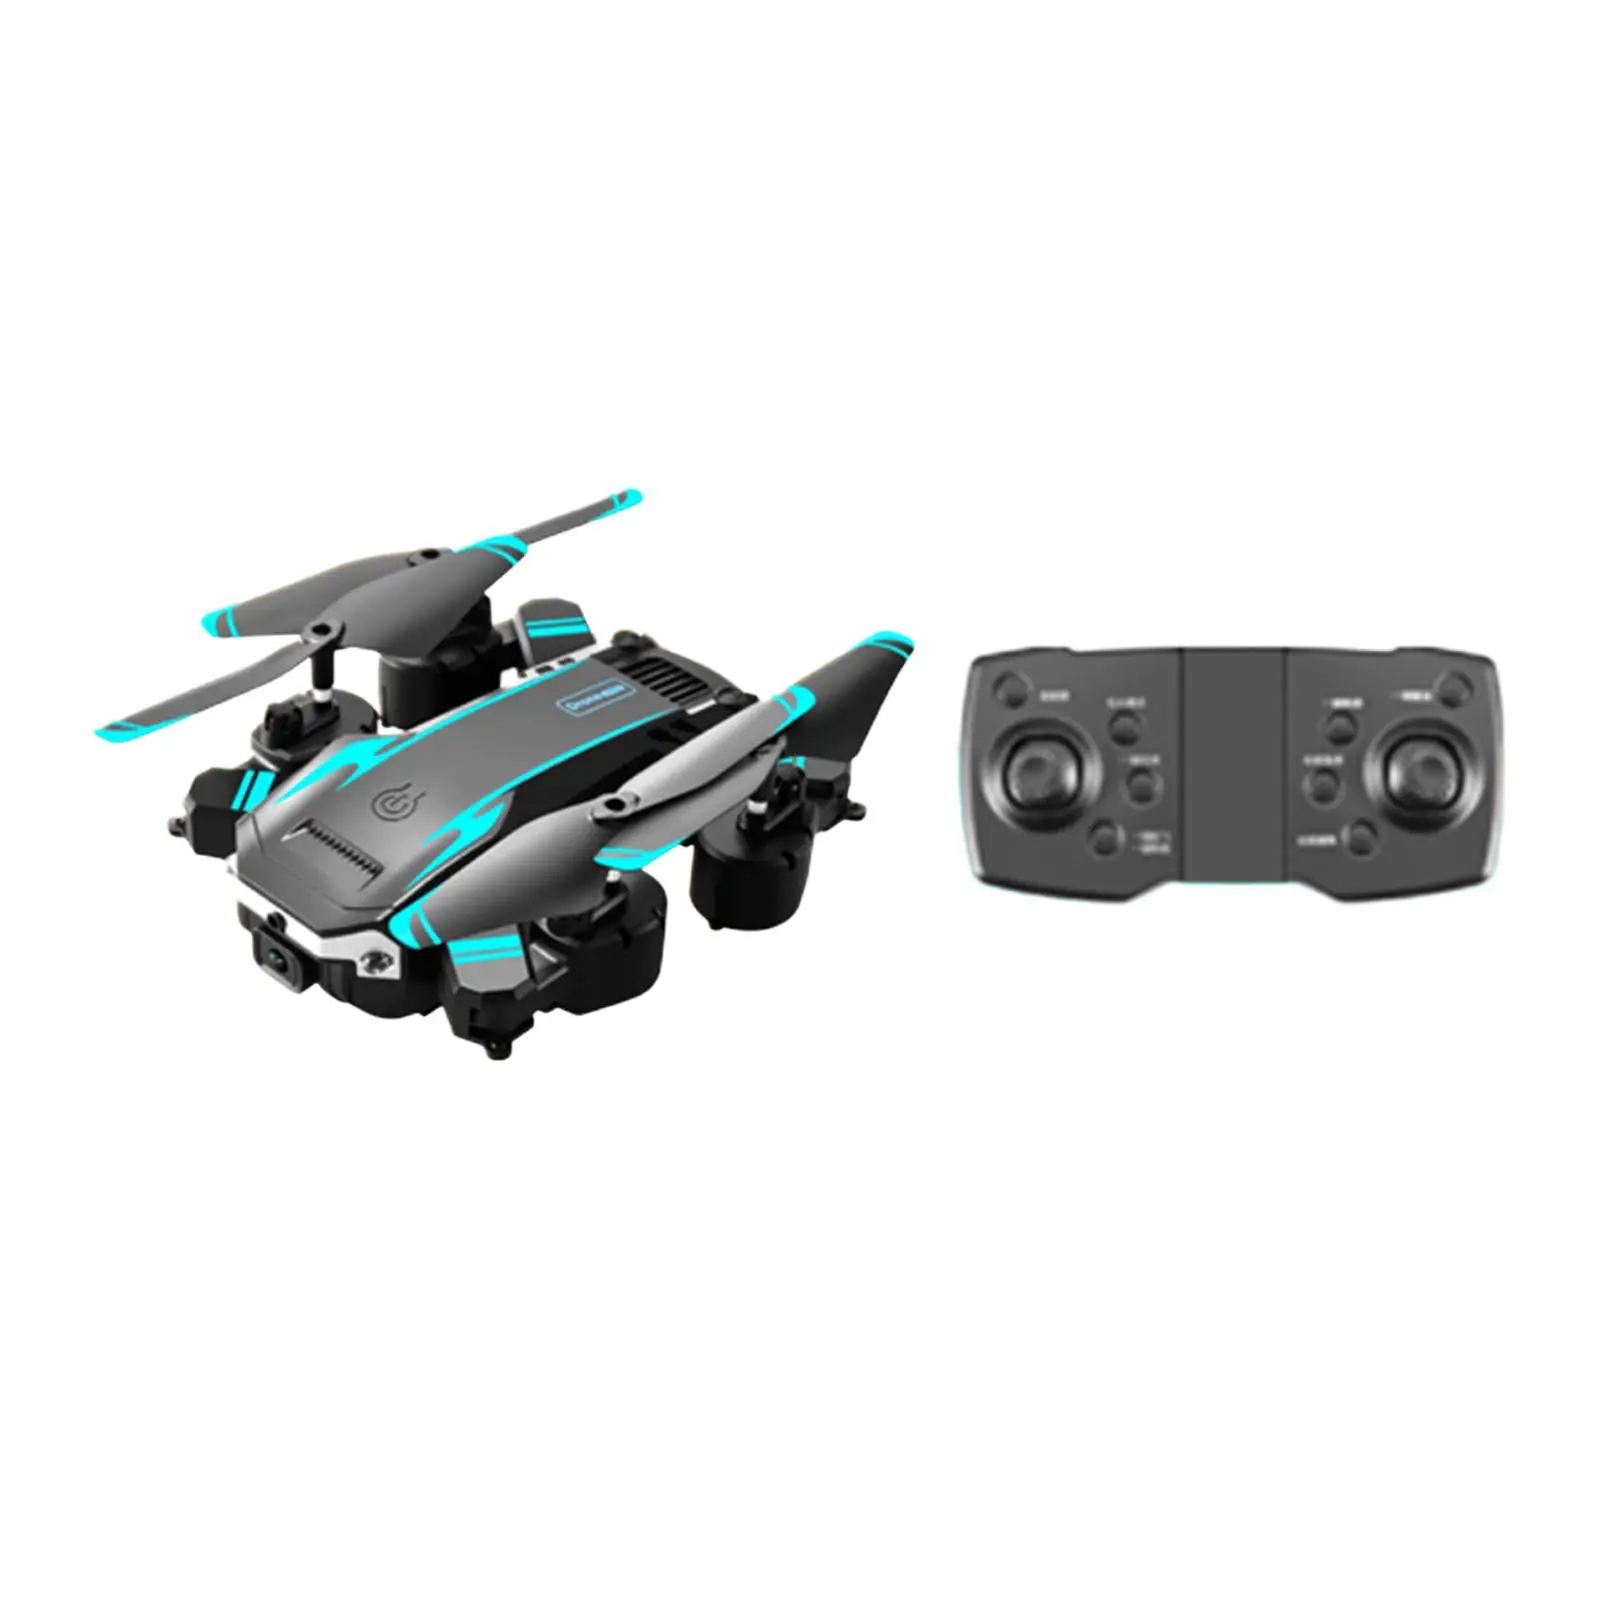 RC Quadcopter Obstacle Avoidance Distance: 100M Remote Control Toys Kids Toys for Beginner Adults Boys Teens Holiday Gift